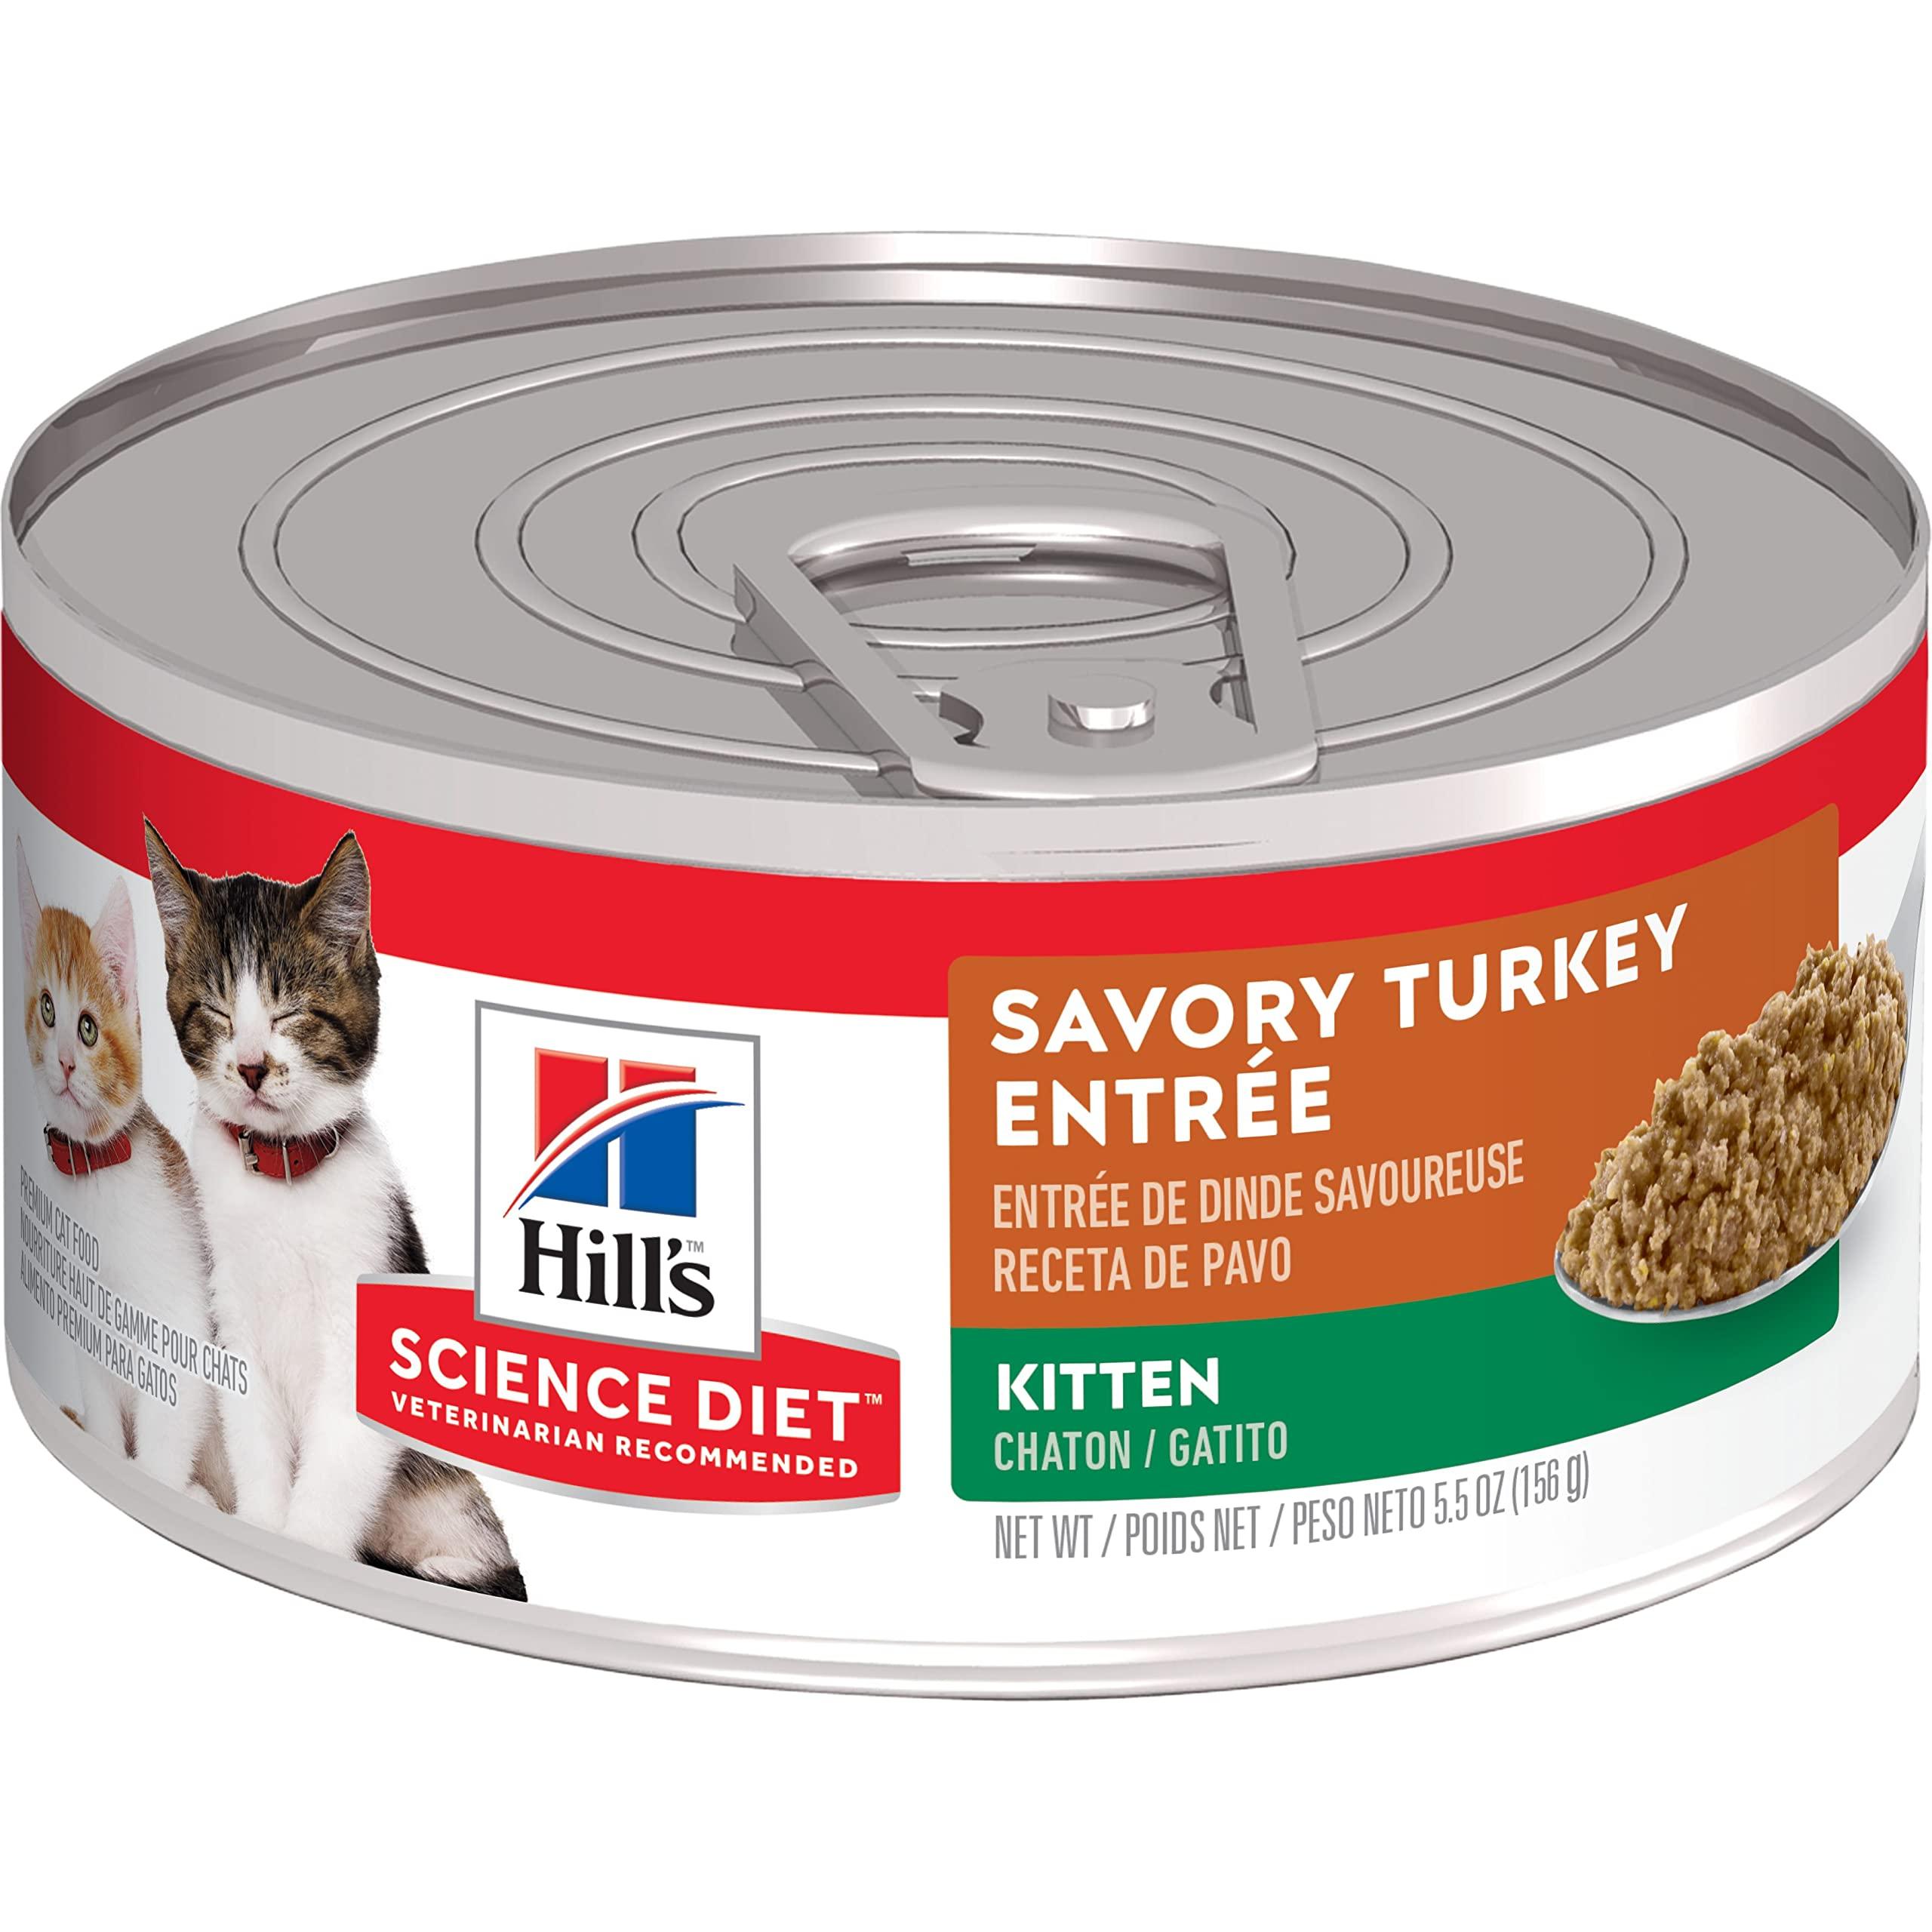 Hill's Science Diet Wet Cat Food, Kitten, Savory Turkey Entre, 5.5 oz. Cans, 24-Pack